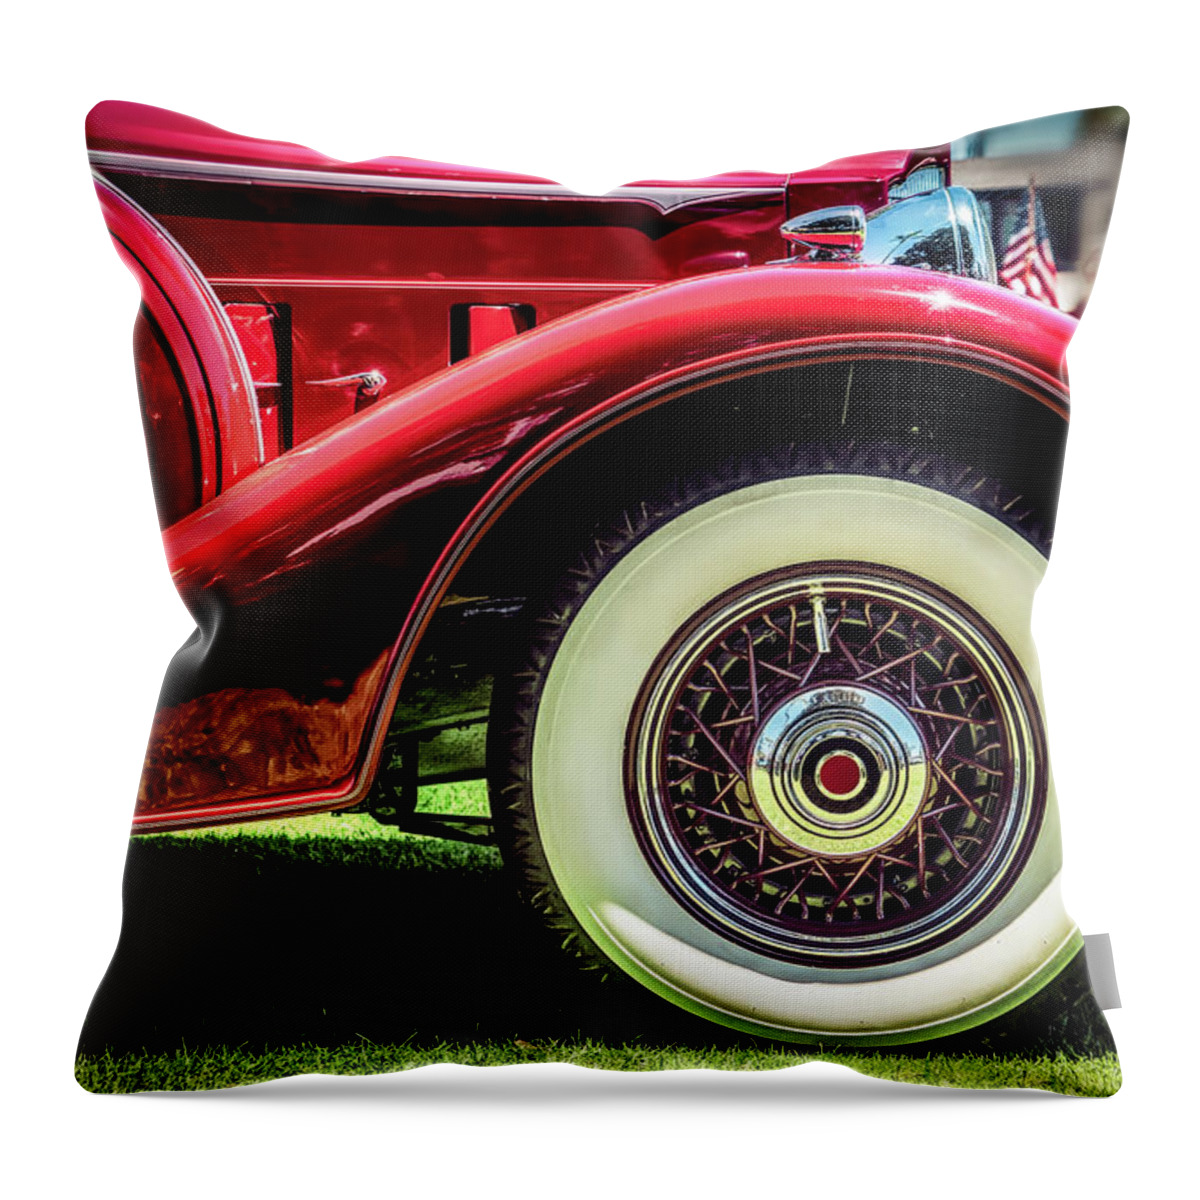 1930 Throw Pillow featuring the photograph The Thirties by Bill Chizek